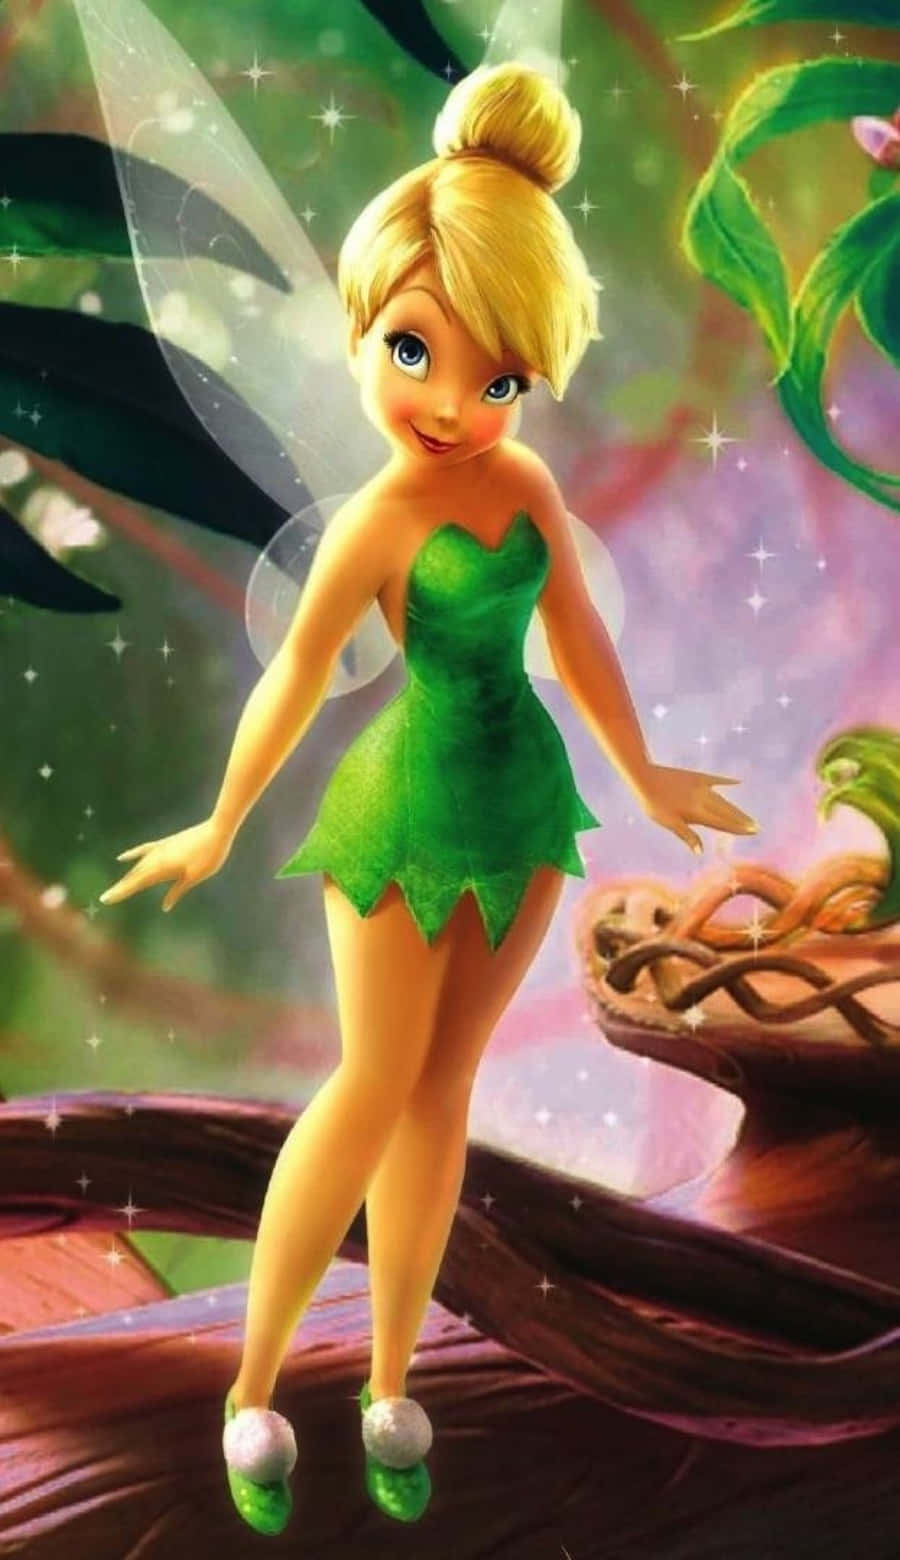 The one and only, Tinkerbell